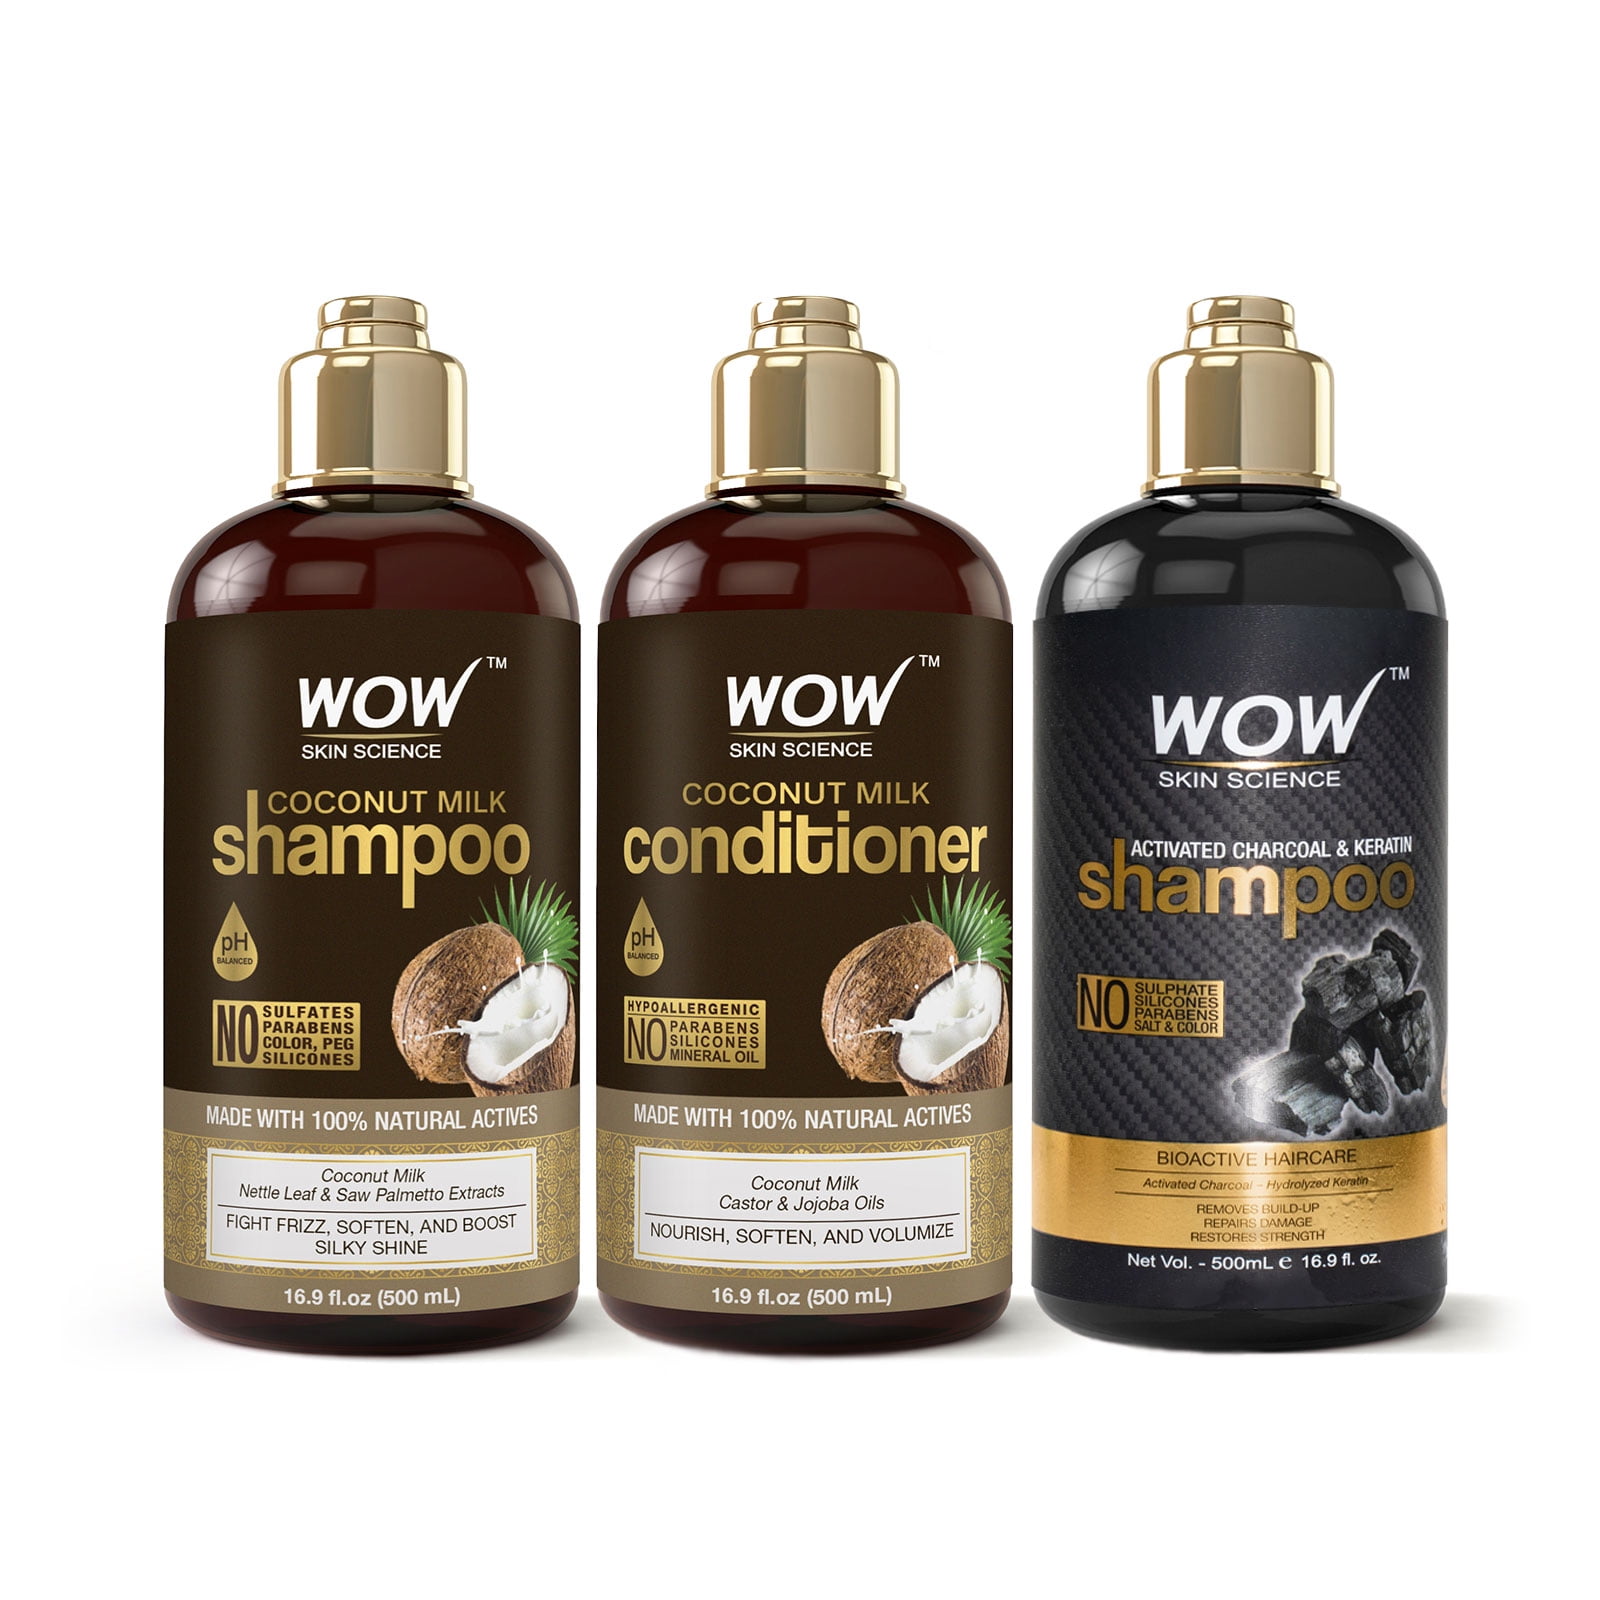 WOW Science Hair Loss Prevention & Scalp Care Daily Shampoo, Conditioner & Hair Revitalizer with Apple Cider Vinegar, Coconut Avocado, Full Size Set, Piece - Walmart.com